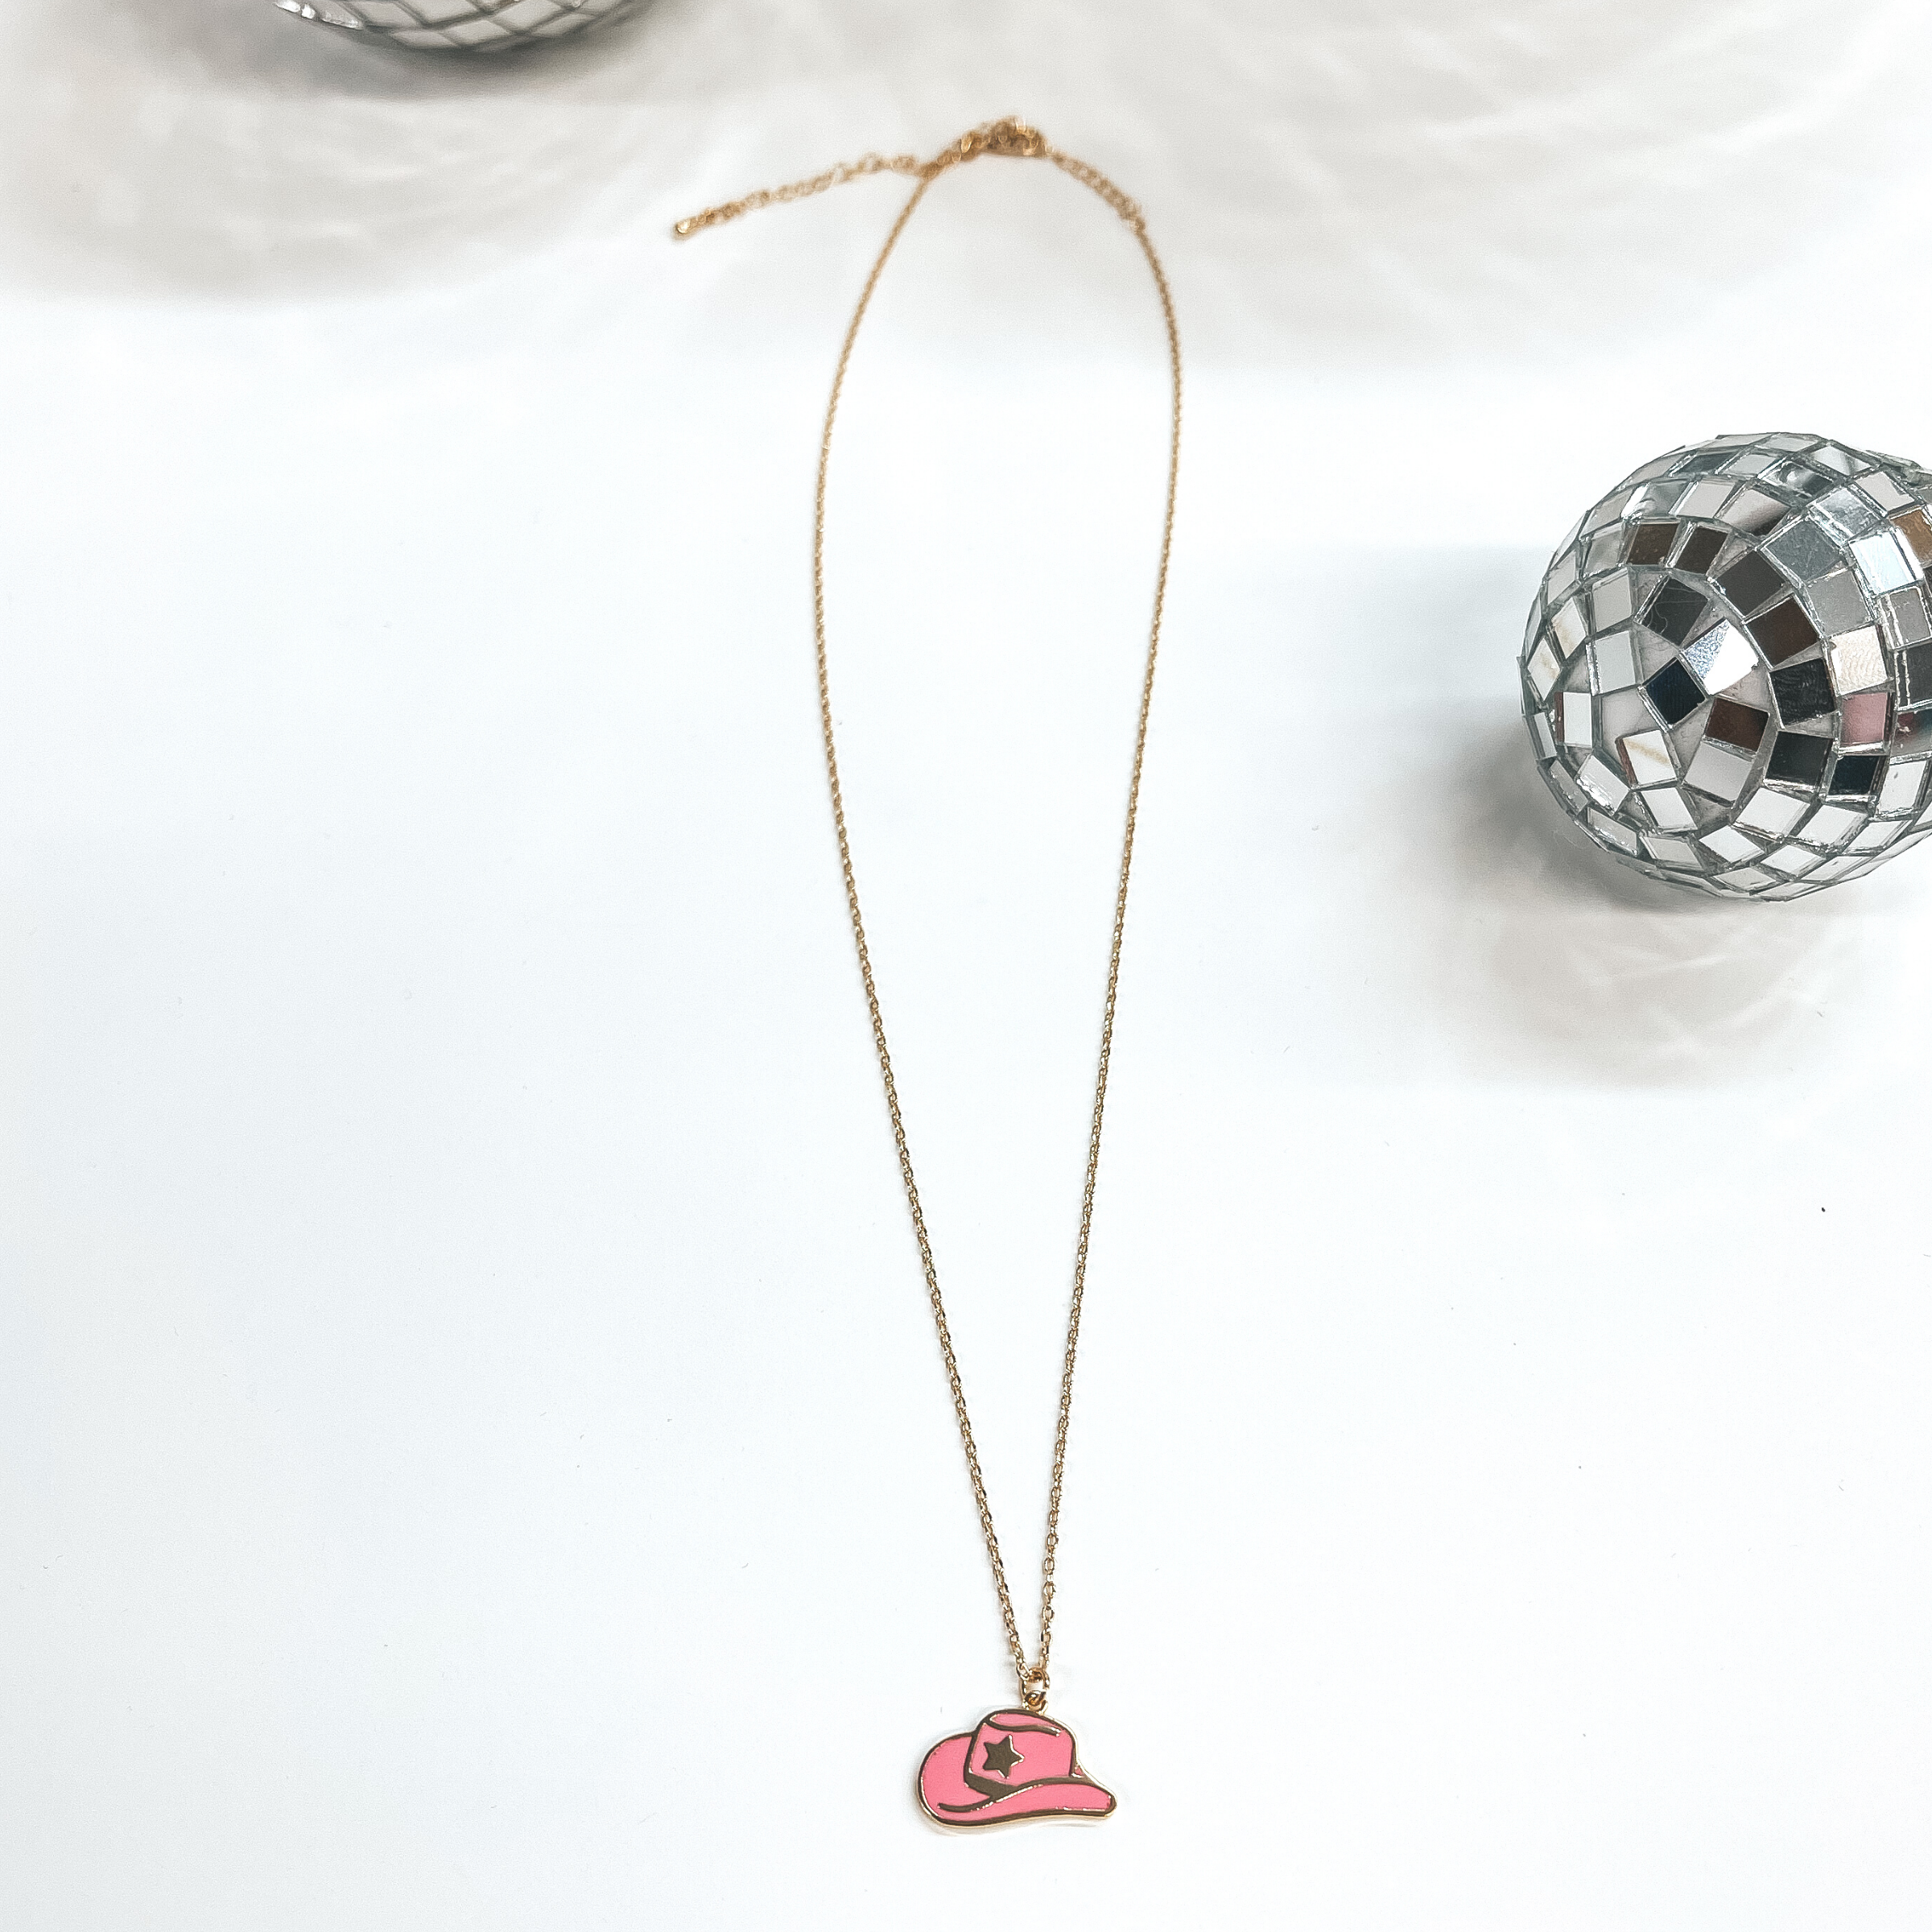 Small gold chain necklace with a pink hat pendant,  the hat pendant has a gold star in the center.  Taken on a white background with disco balls as decor.